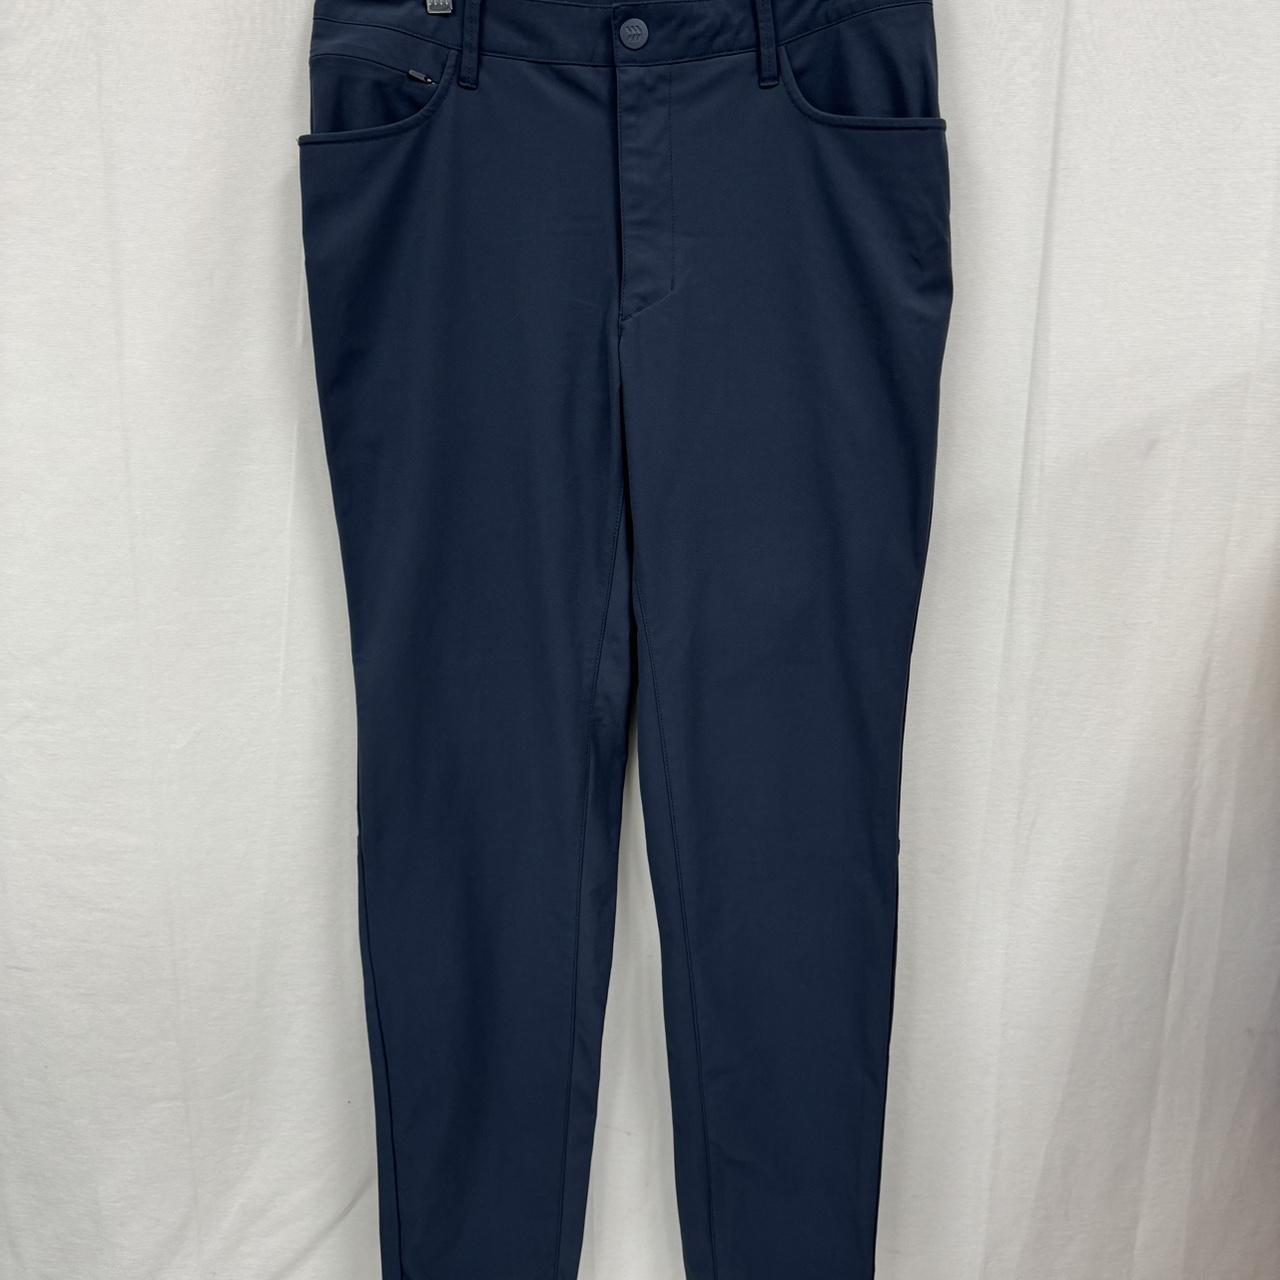 all in motion navy blue chino golf pants men's size - Depop